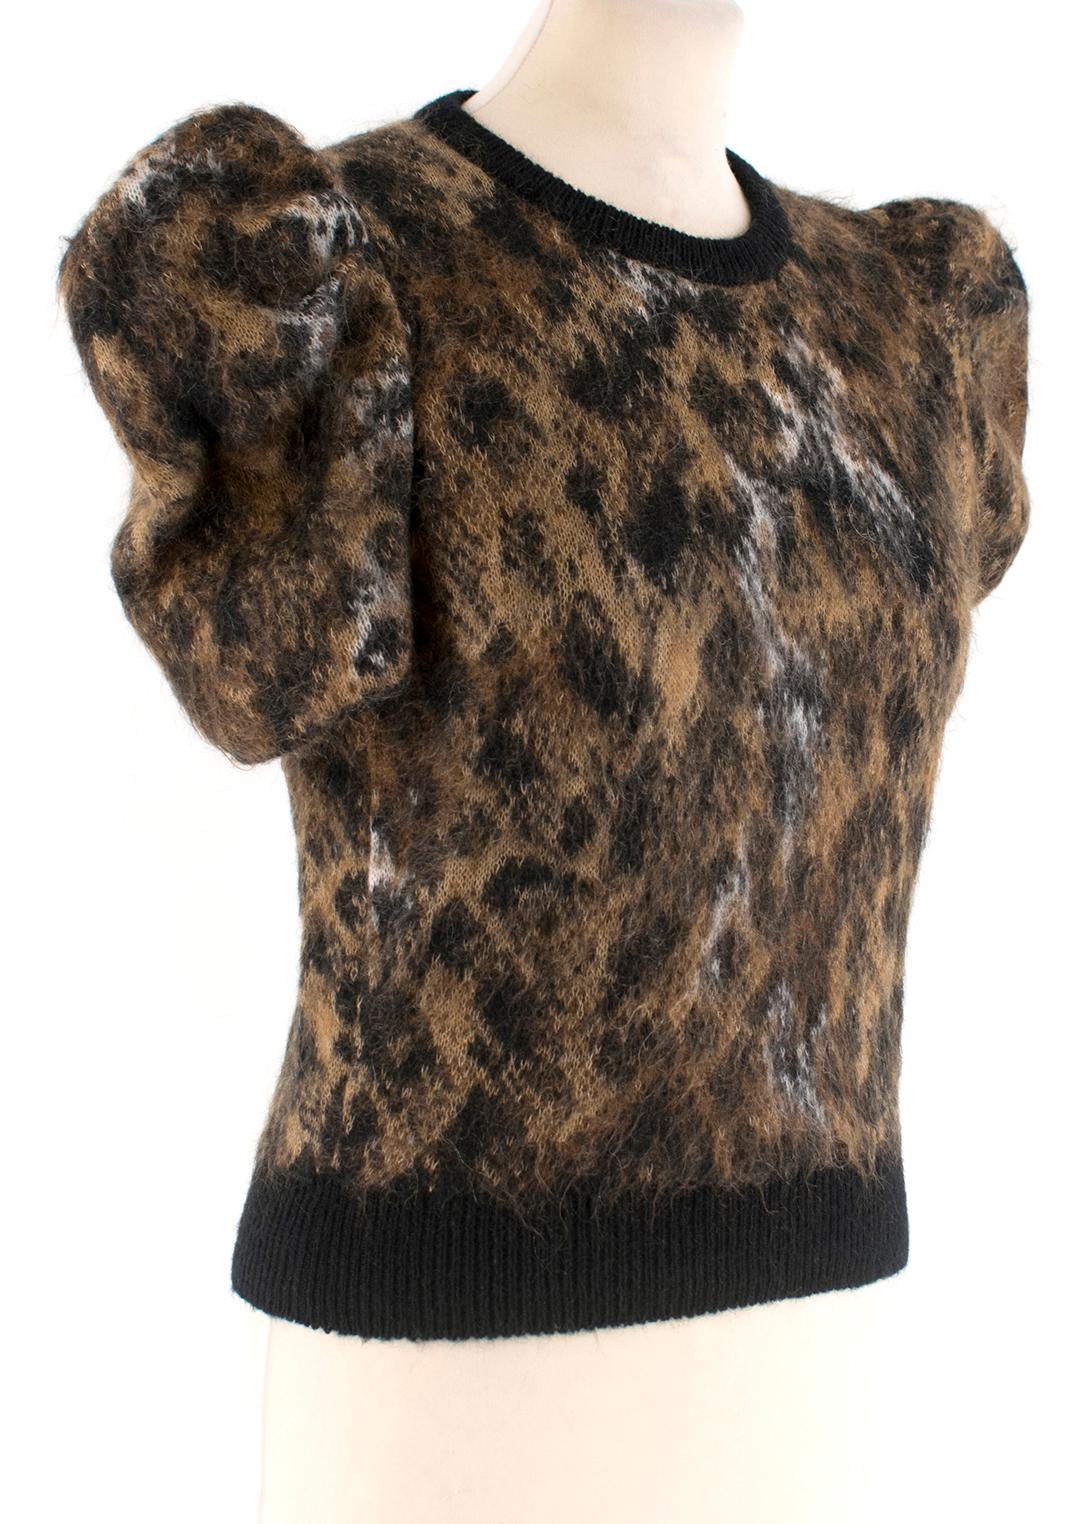 Saint Laurent Puff Sleeve Mohair Knit Top

-Puff sleeve point 
-Mohair animal printing 
-Straight slim fit 
-Good in condition  

Please note, these items are pre-owned and may show signs of being stored even when unworn and unused. This is